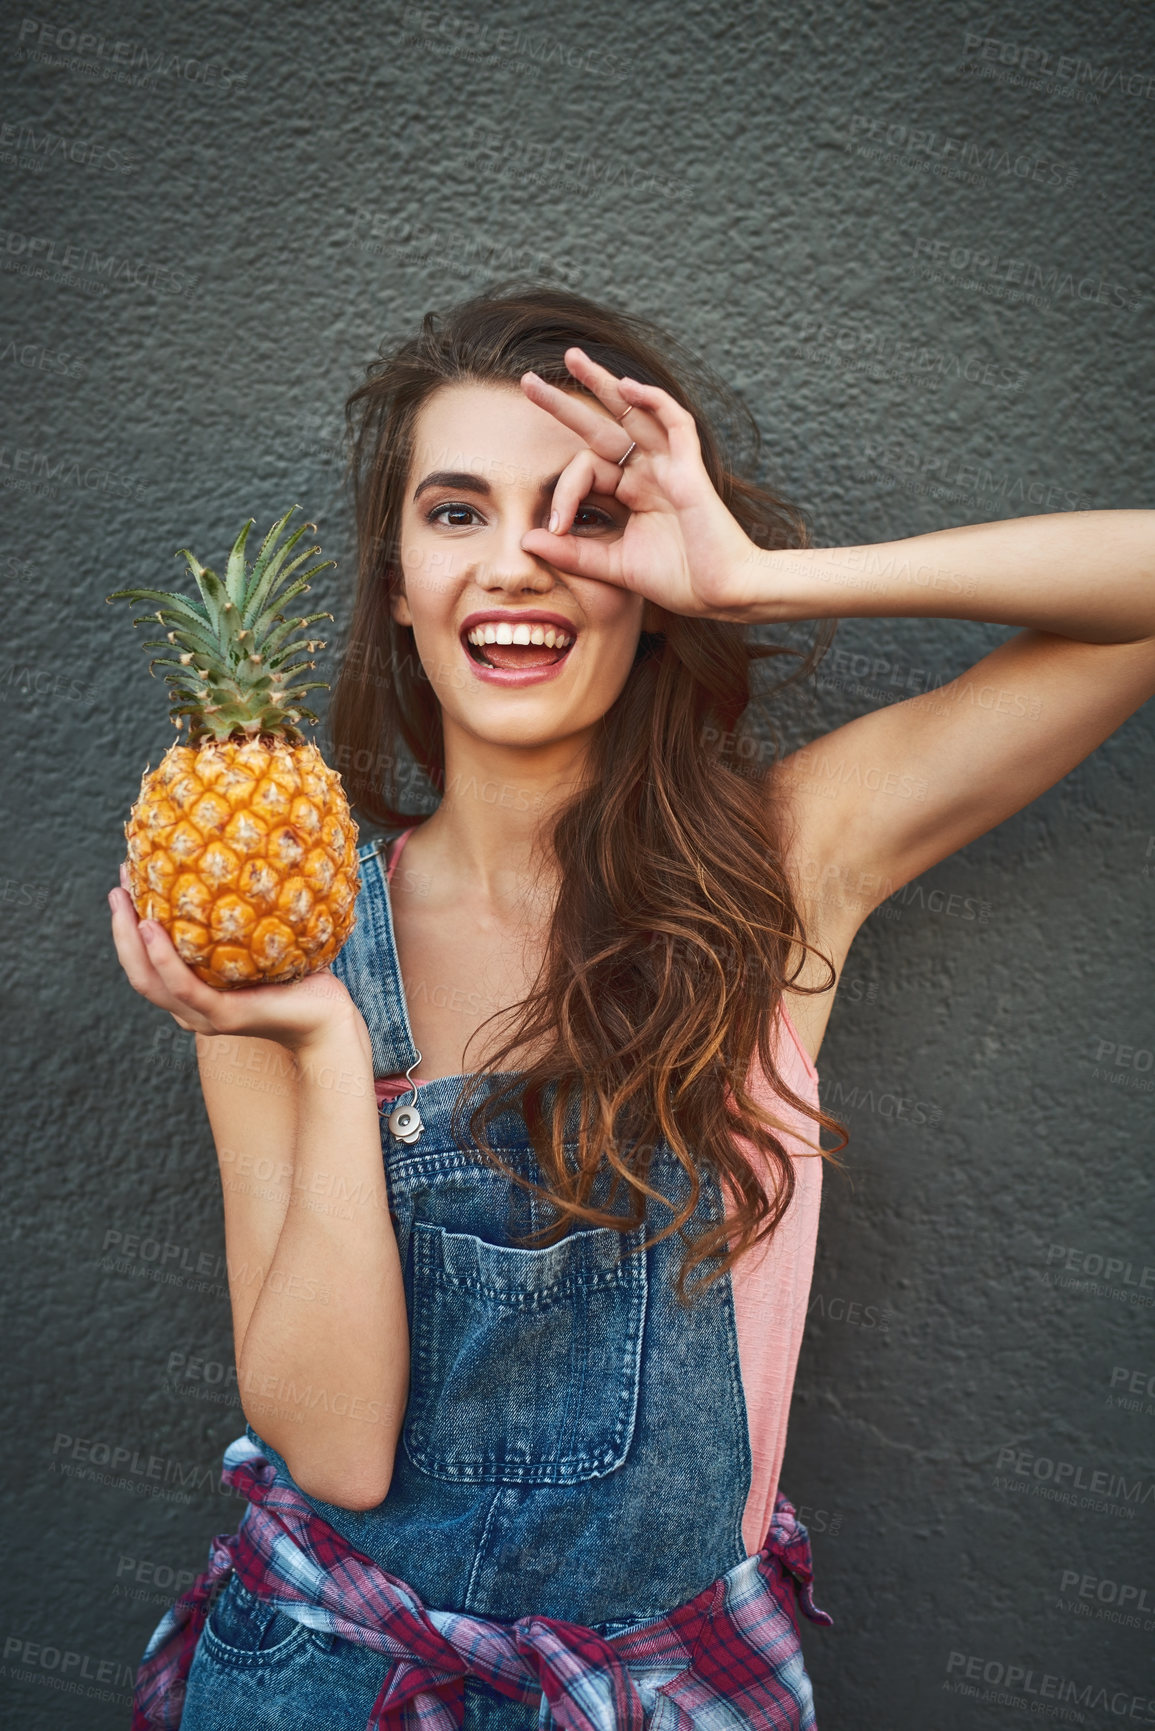 Buy stock photo Portrait of a carefree young woman showing a hand gesture on her face while holding a pineapple against a grey background